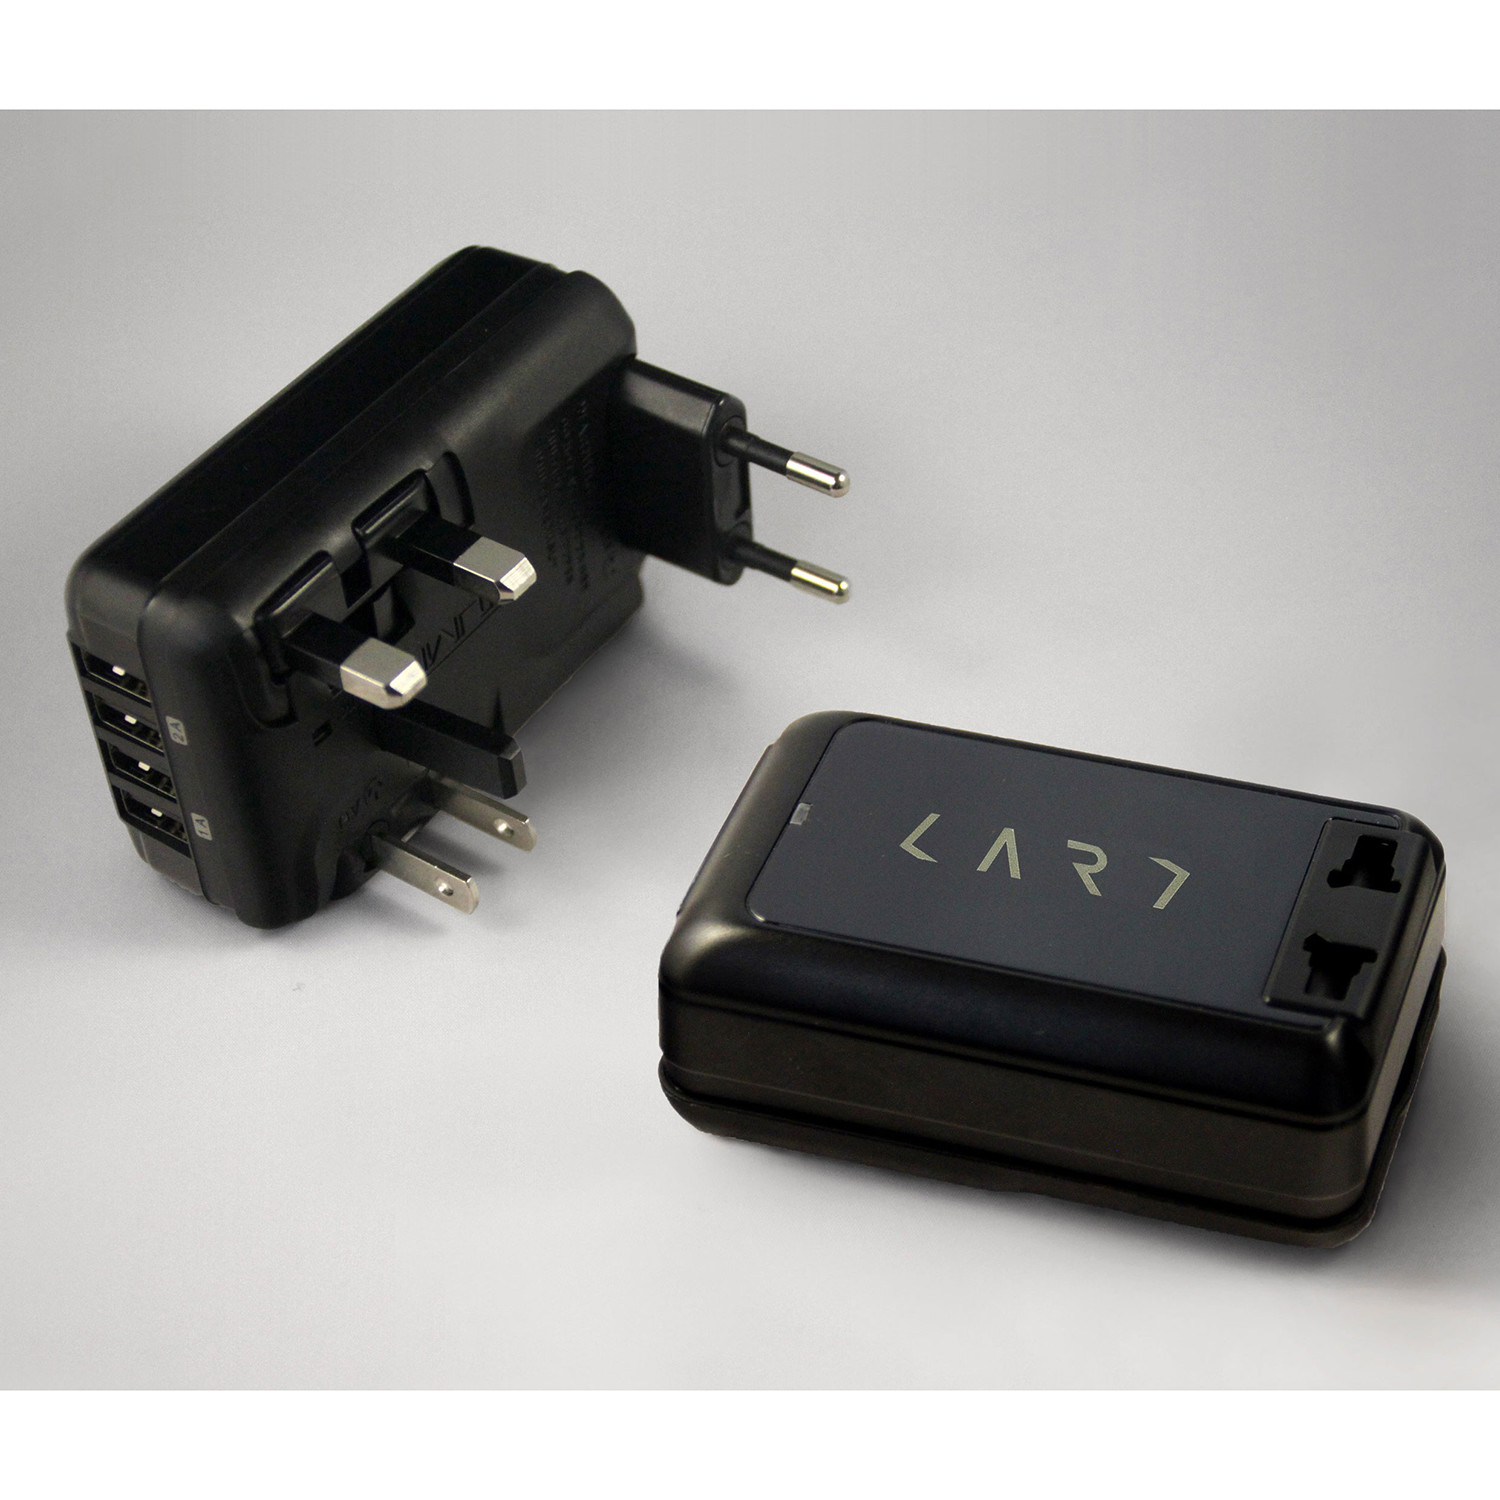 card 4 travel adapter